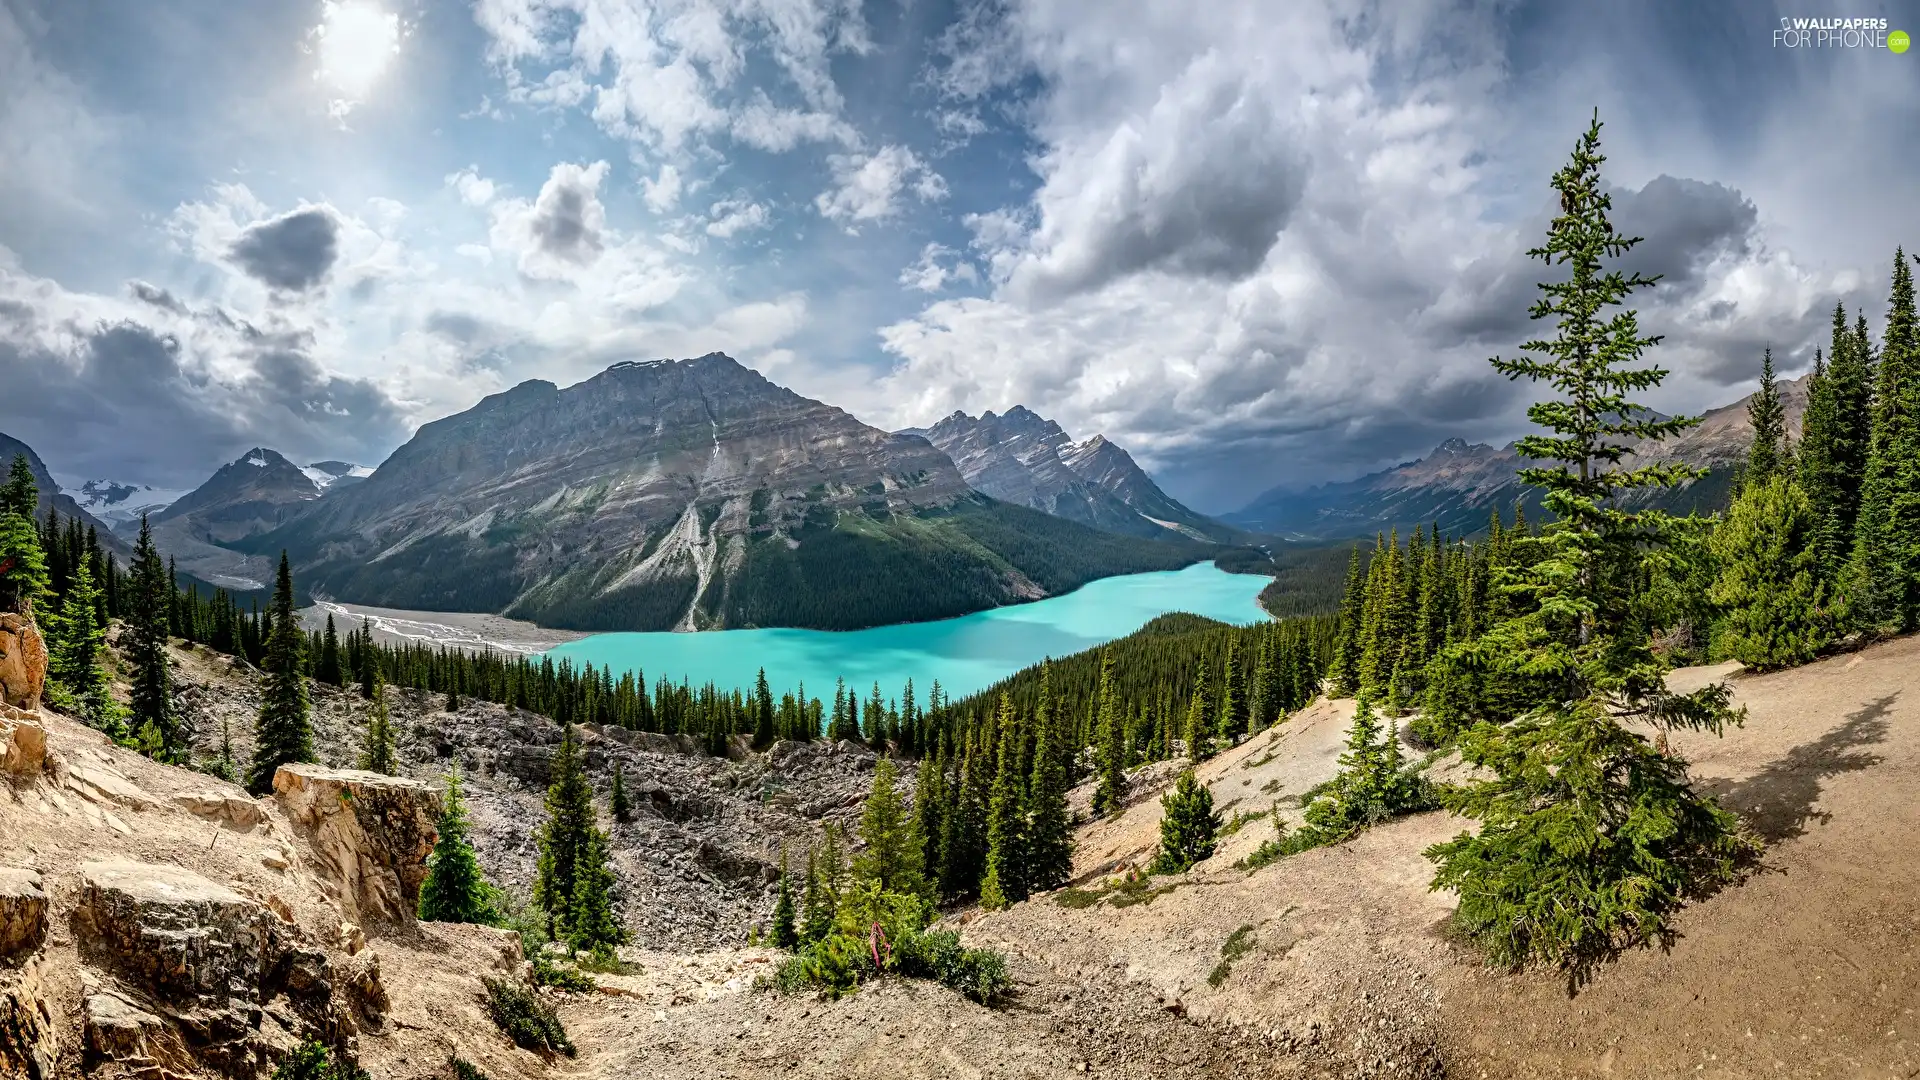 Spruces, Peyto, clouds, Banff National Park, trees, lake, Mountains, Canada, Province of Alberta, viewes